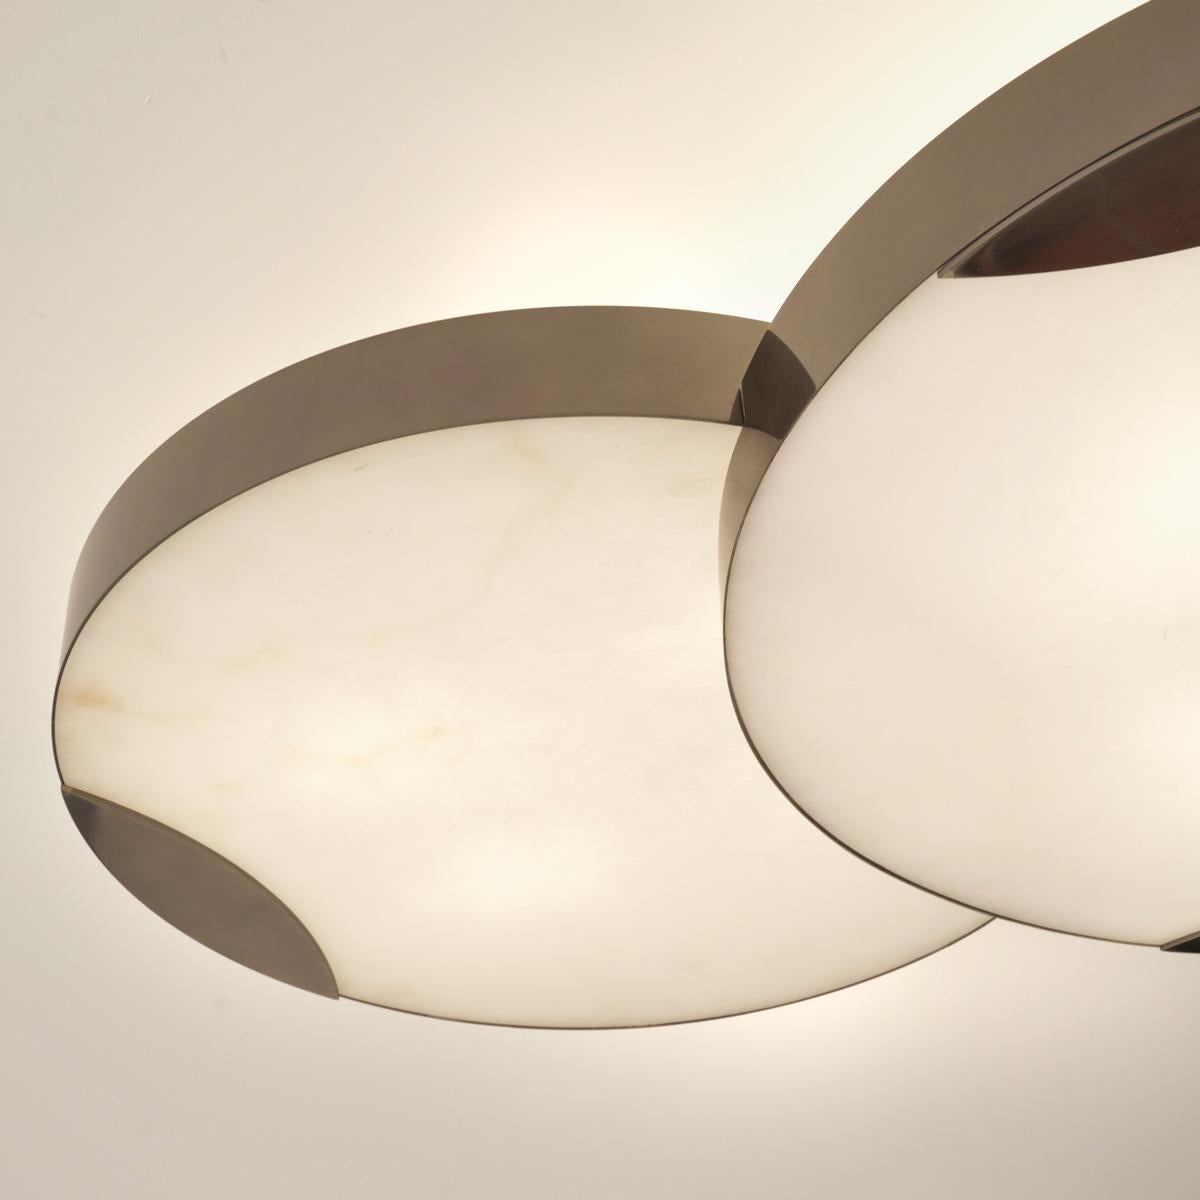 Cloud N.4 Ceiling Light by Gaspare Asaro-Peltro Finish For Sale 3